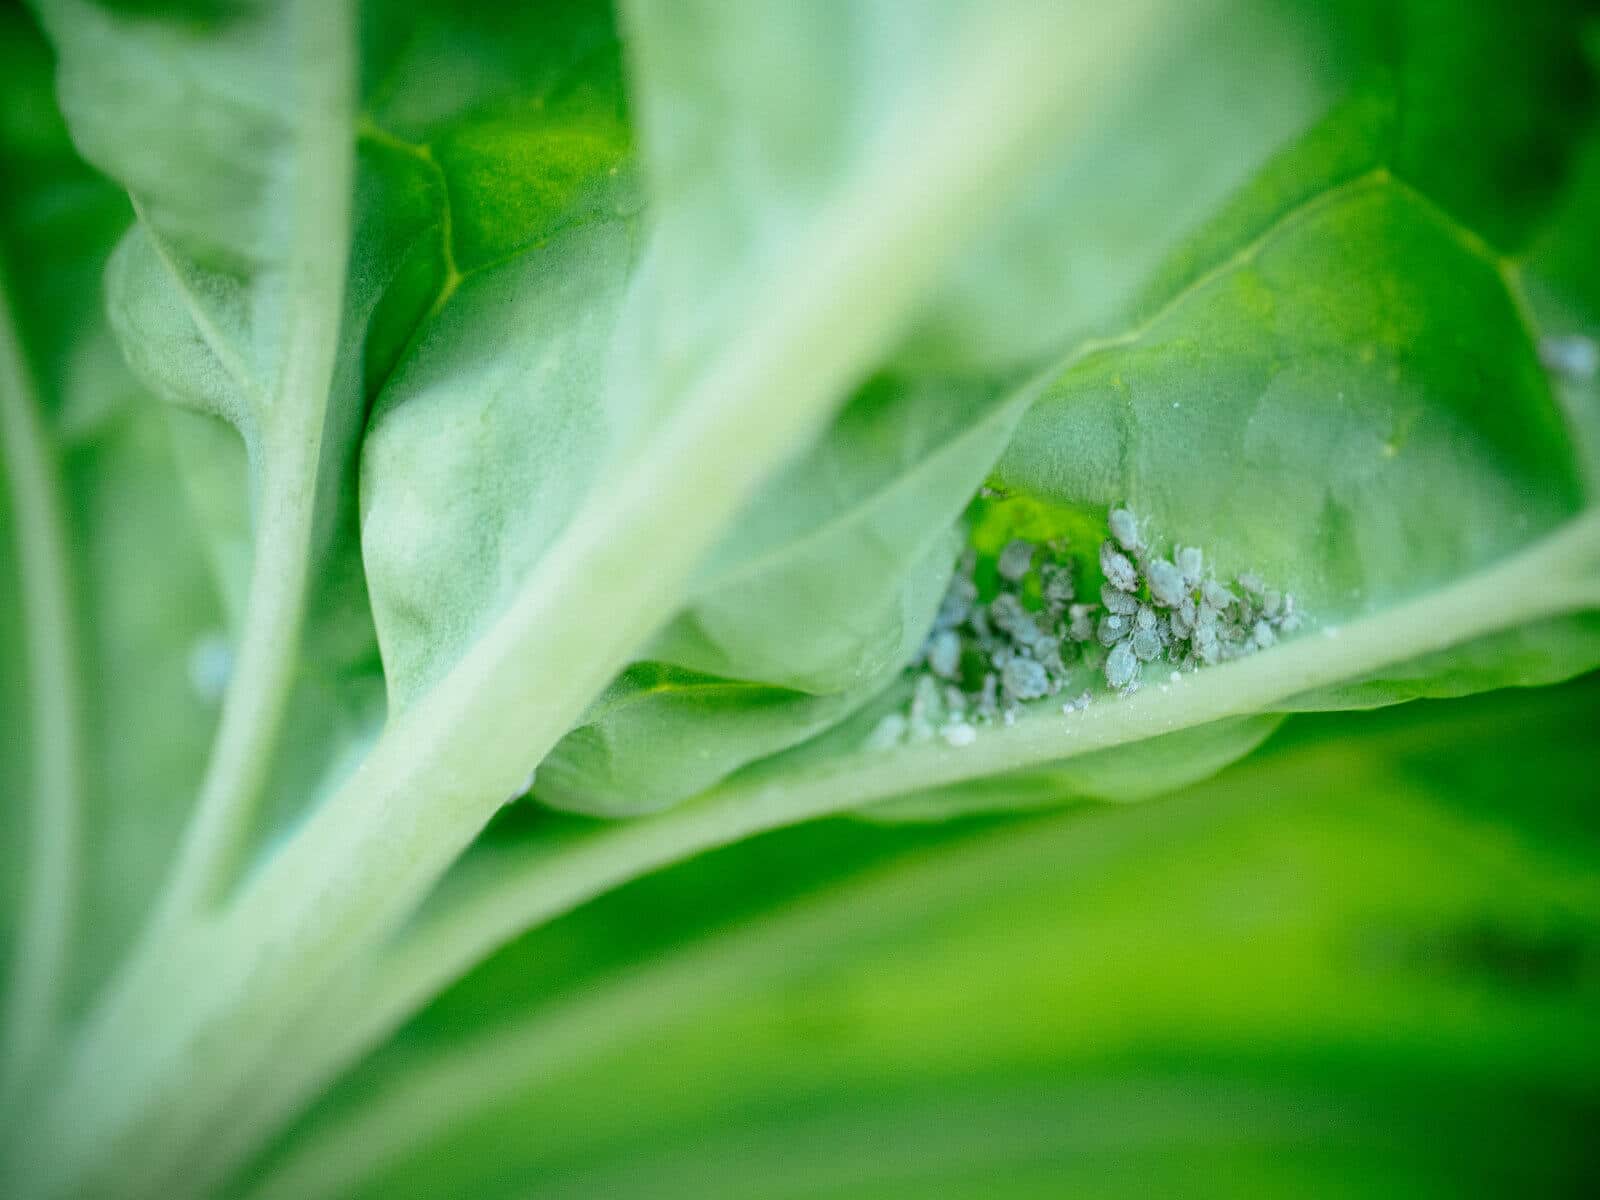 Control aphids naturally without toxic chemicals